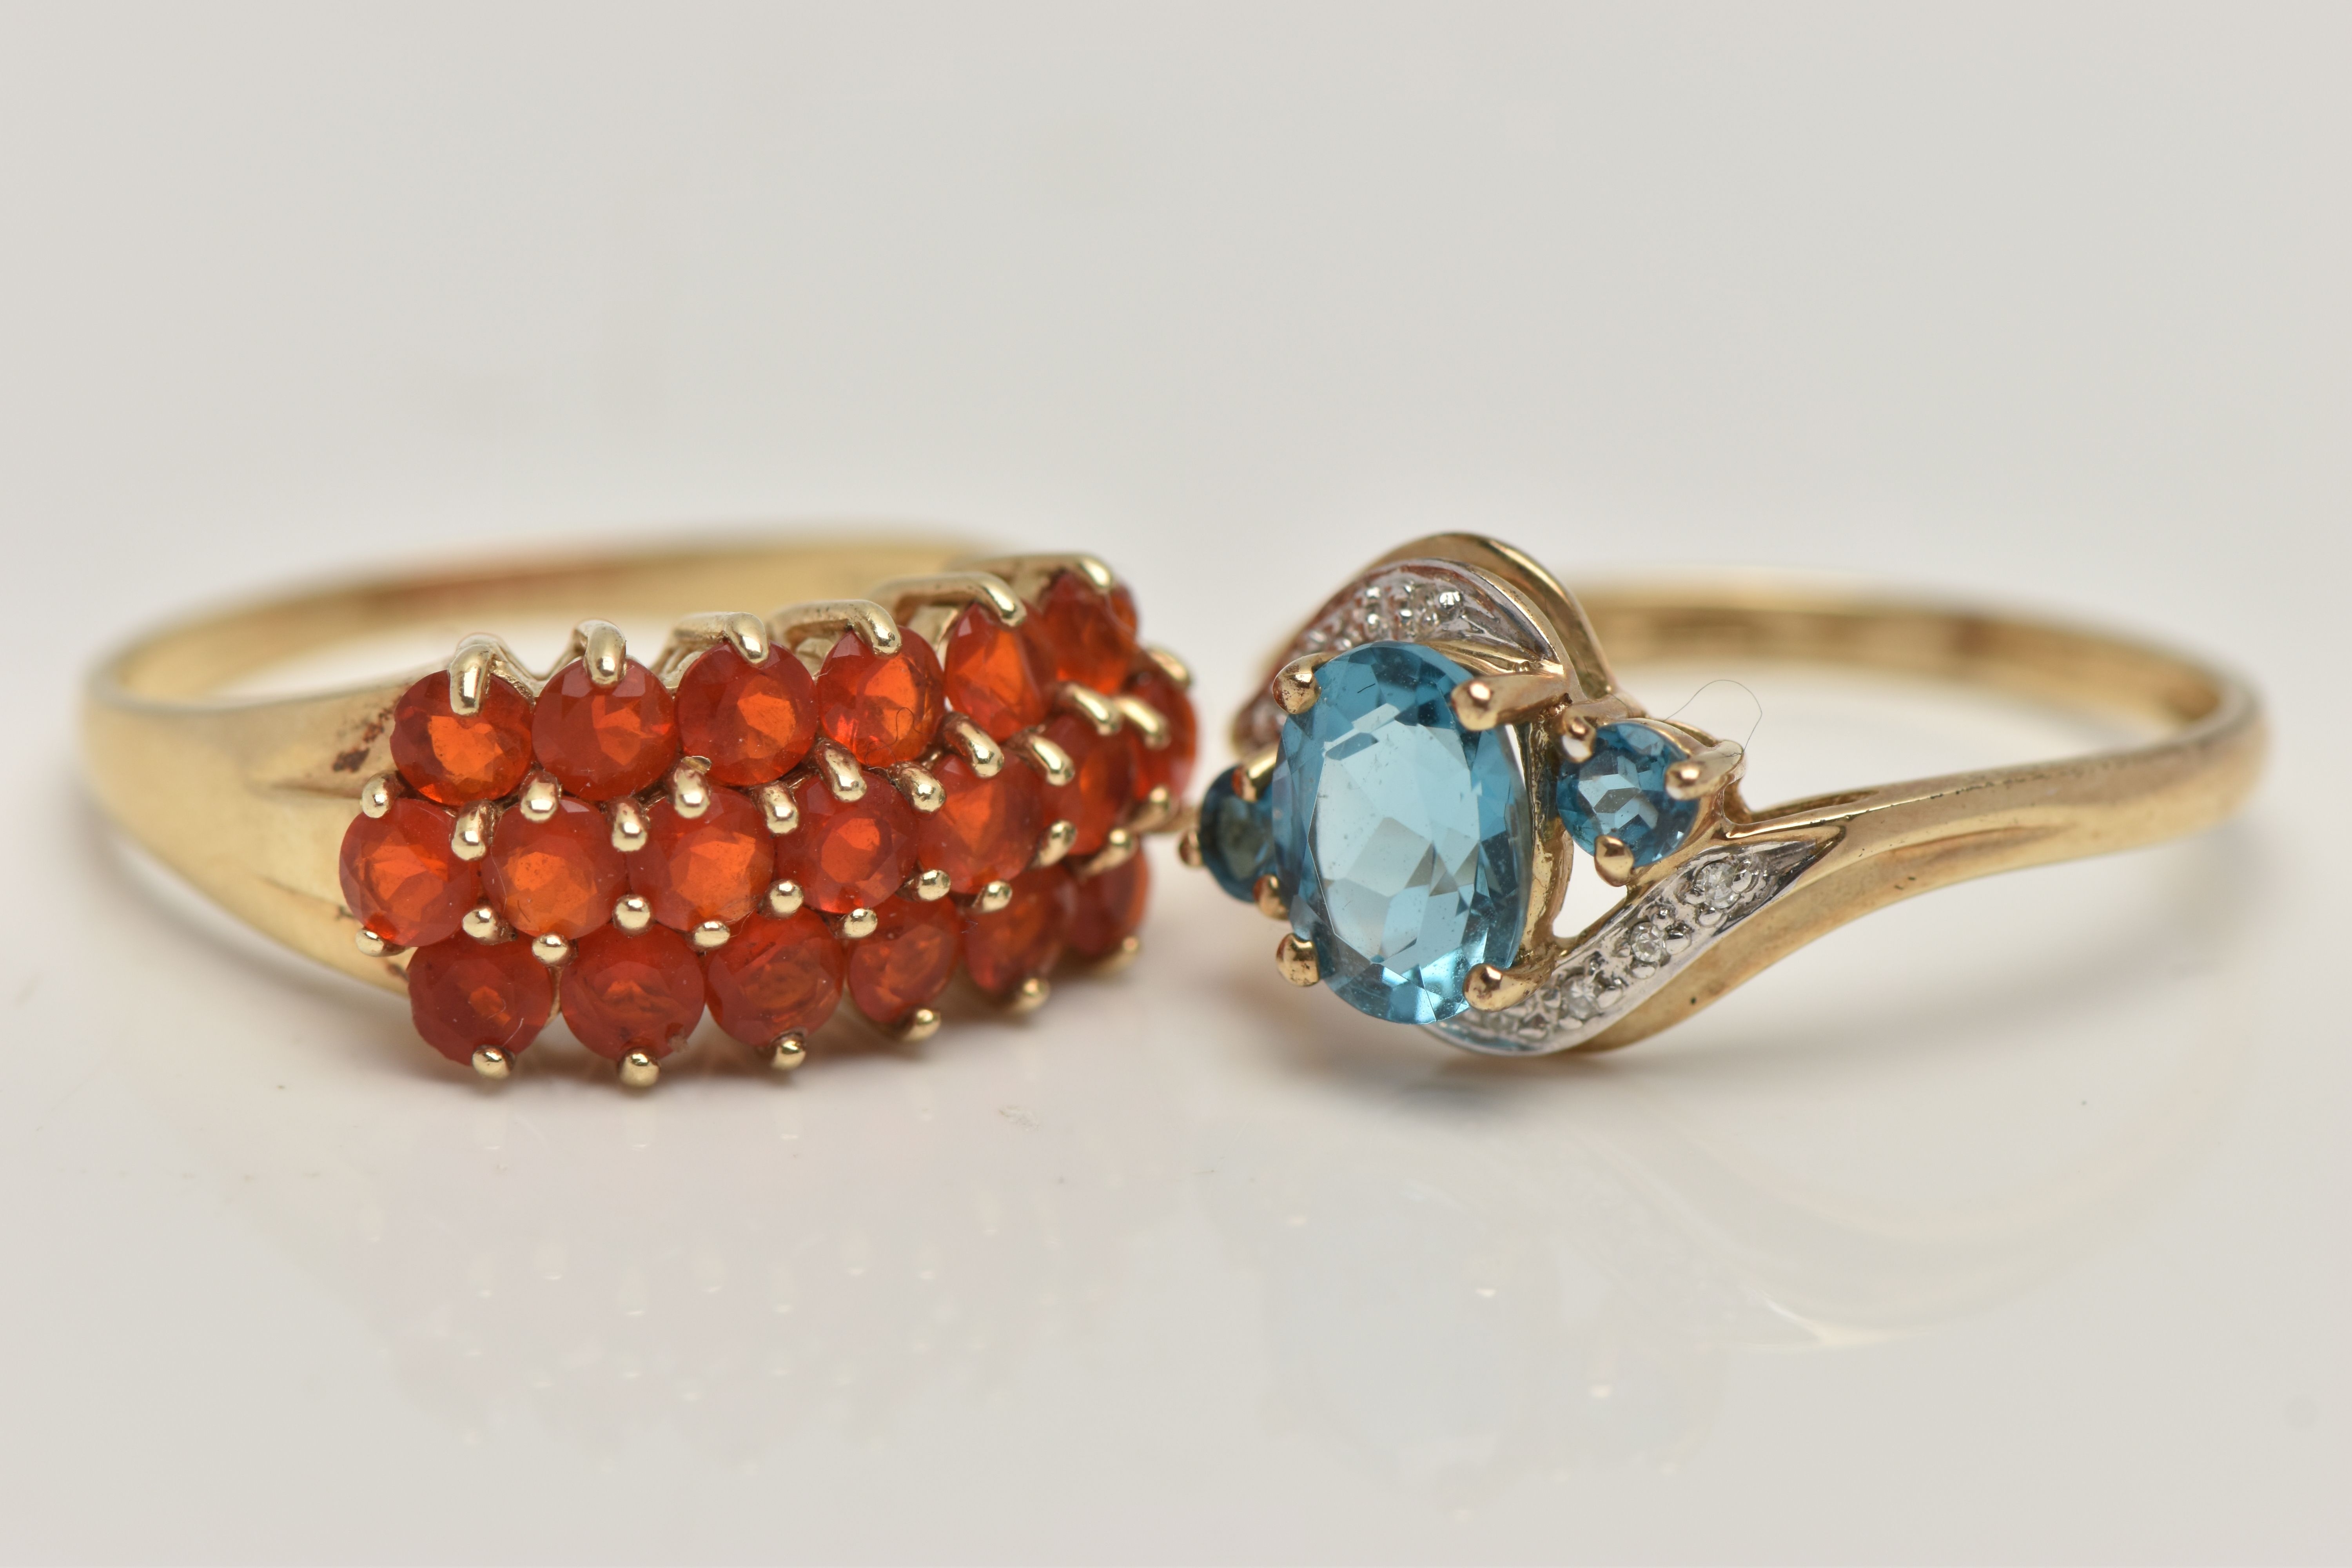 TWO 9CT GOLD GEM SET RINGS, the first a blue topaz and diamond crossover ring, hallmarked 9ct - Image 2 of 4